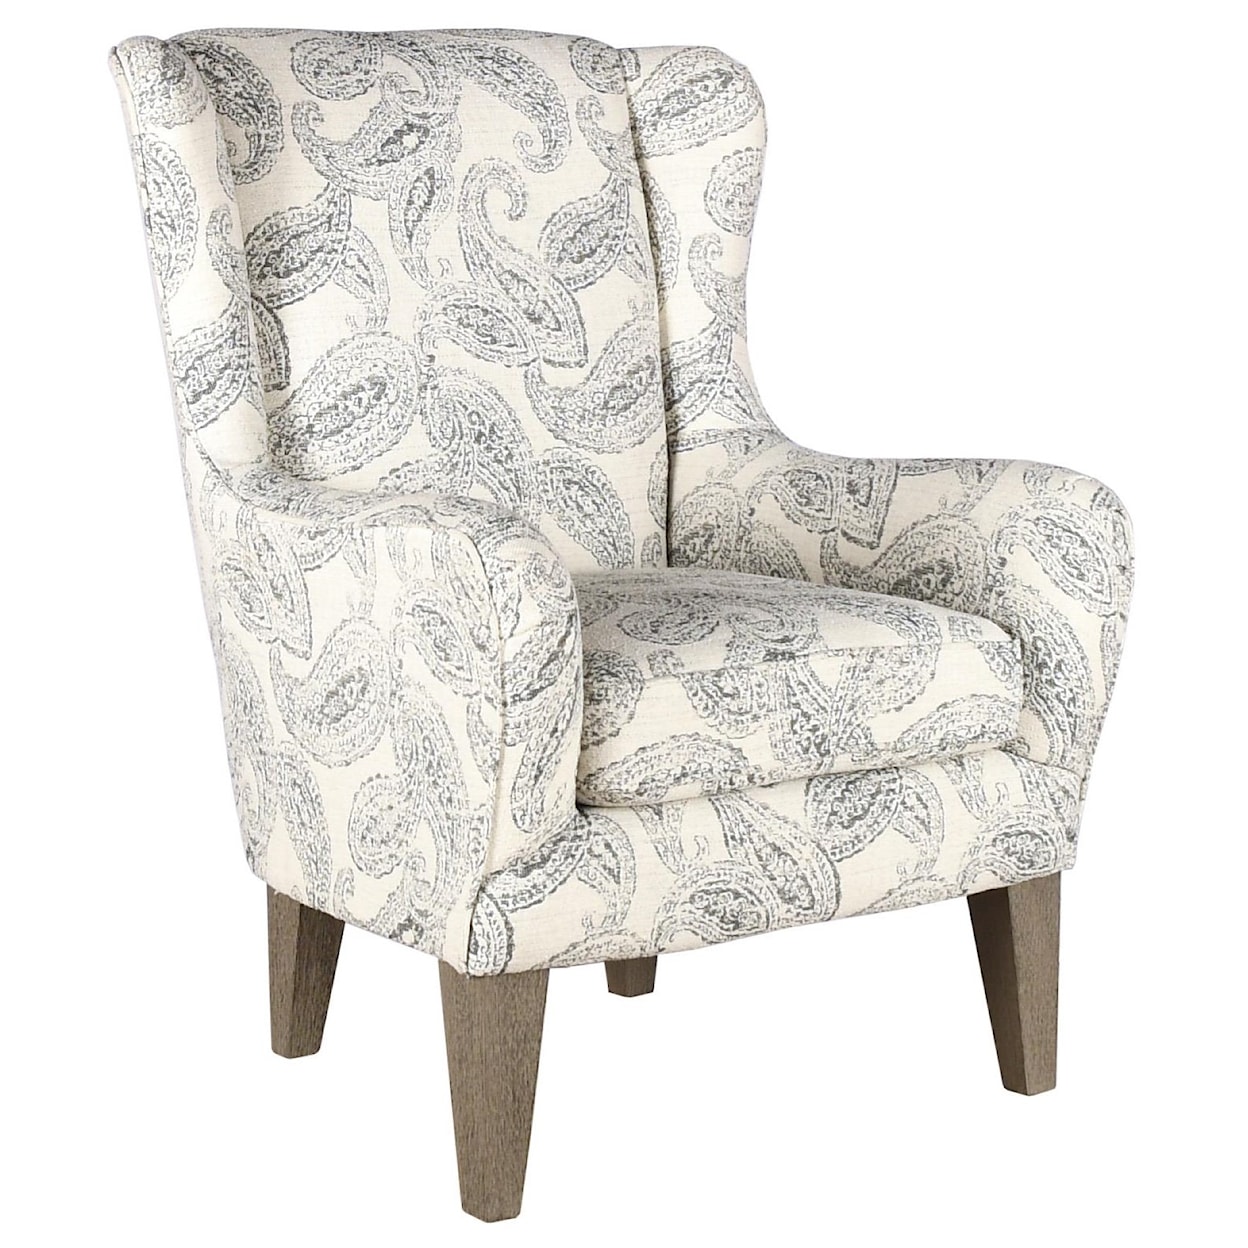 Bravo Furniture Wing Chairs Upholstered Chairs